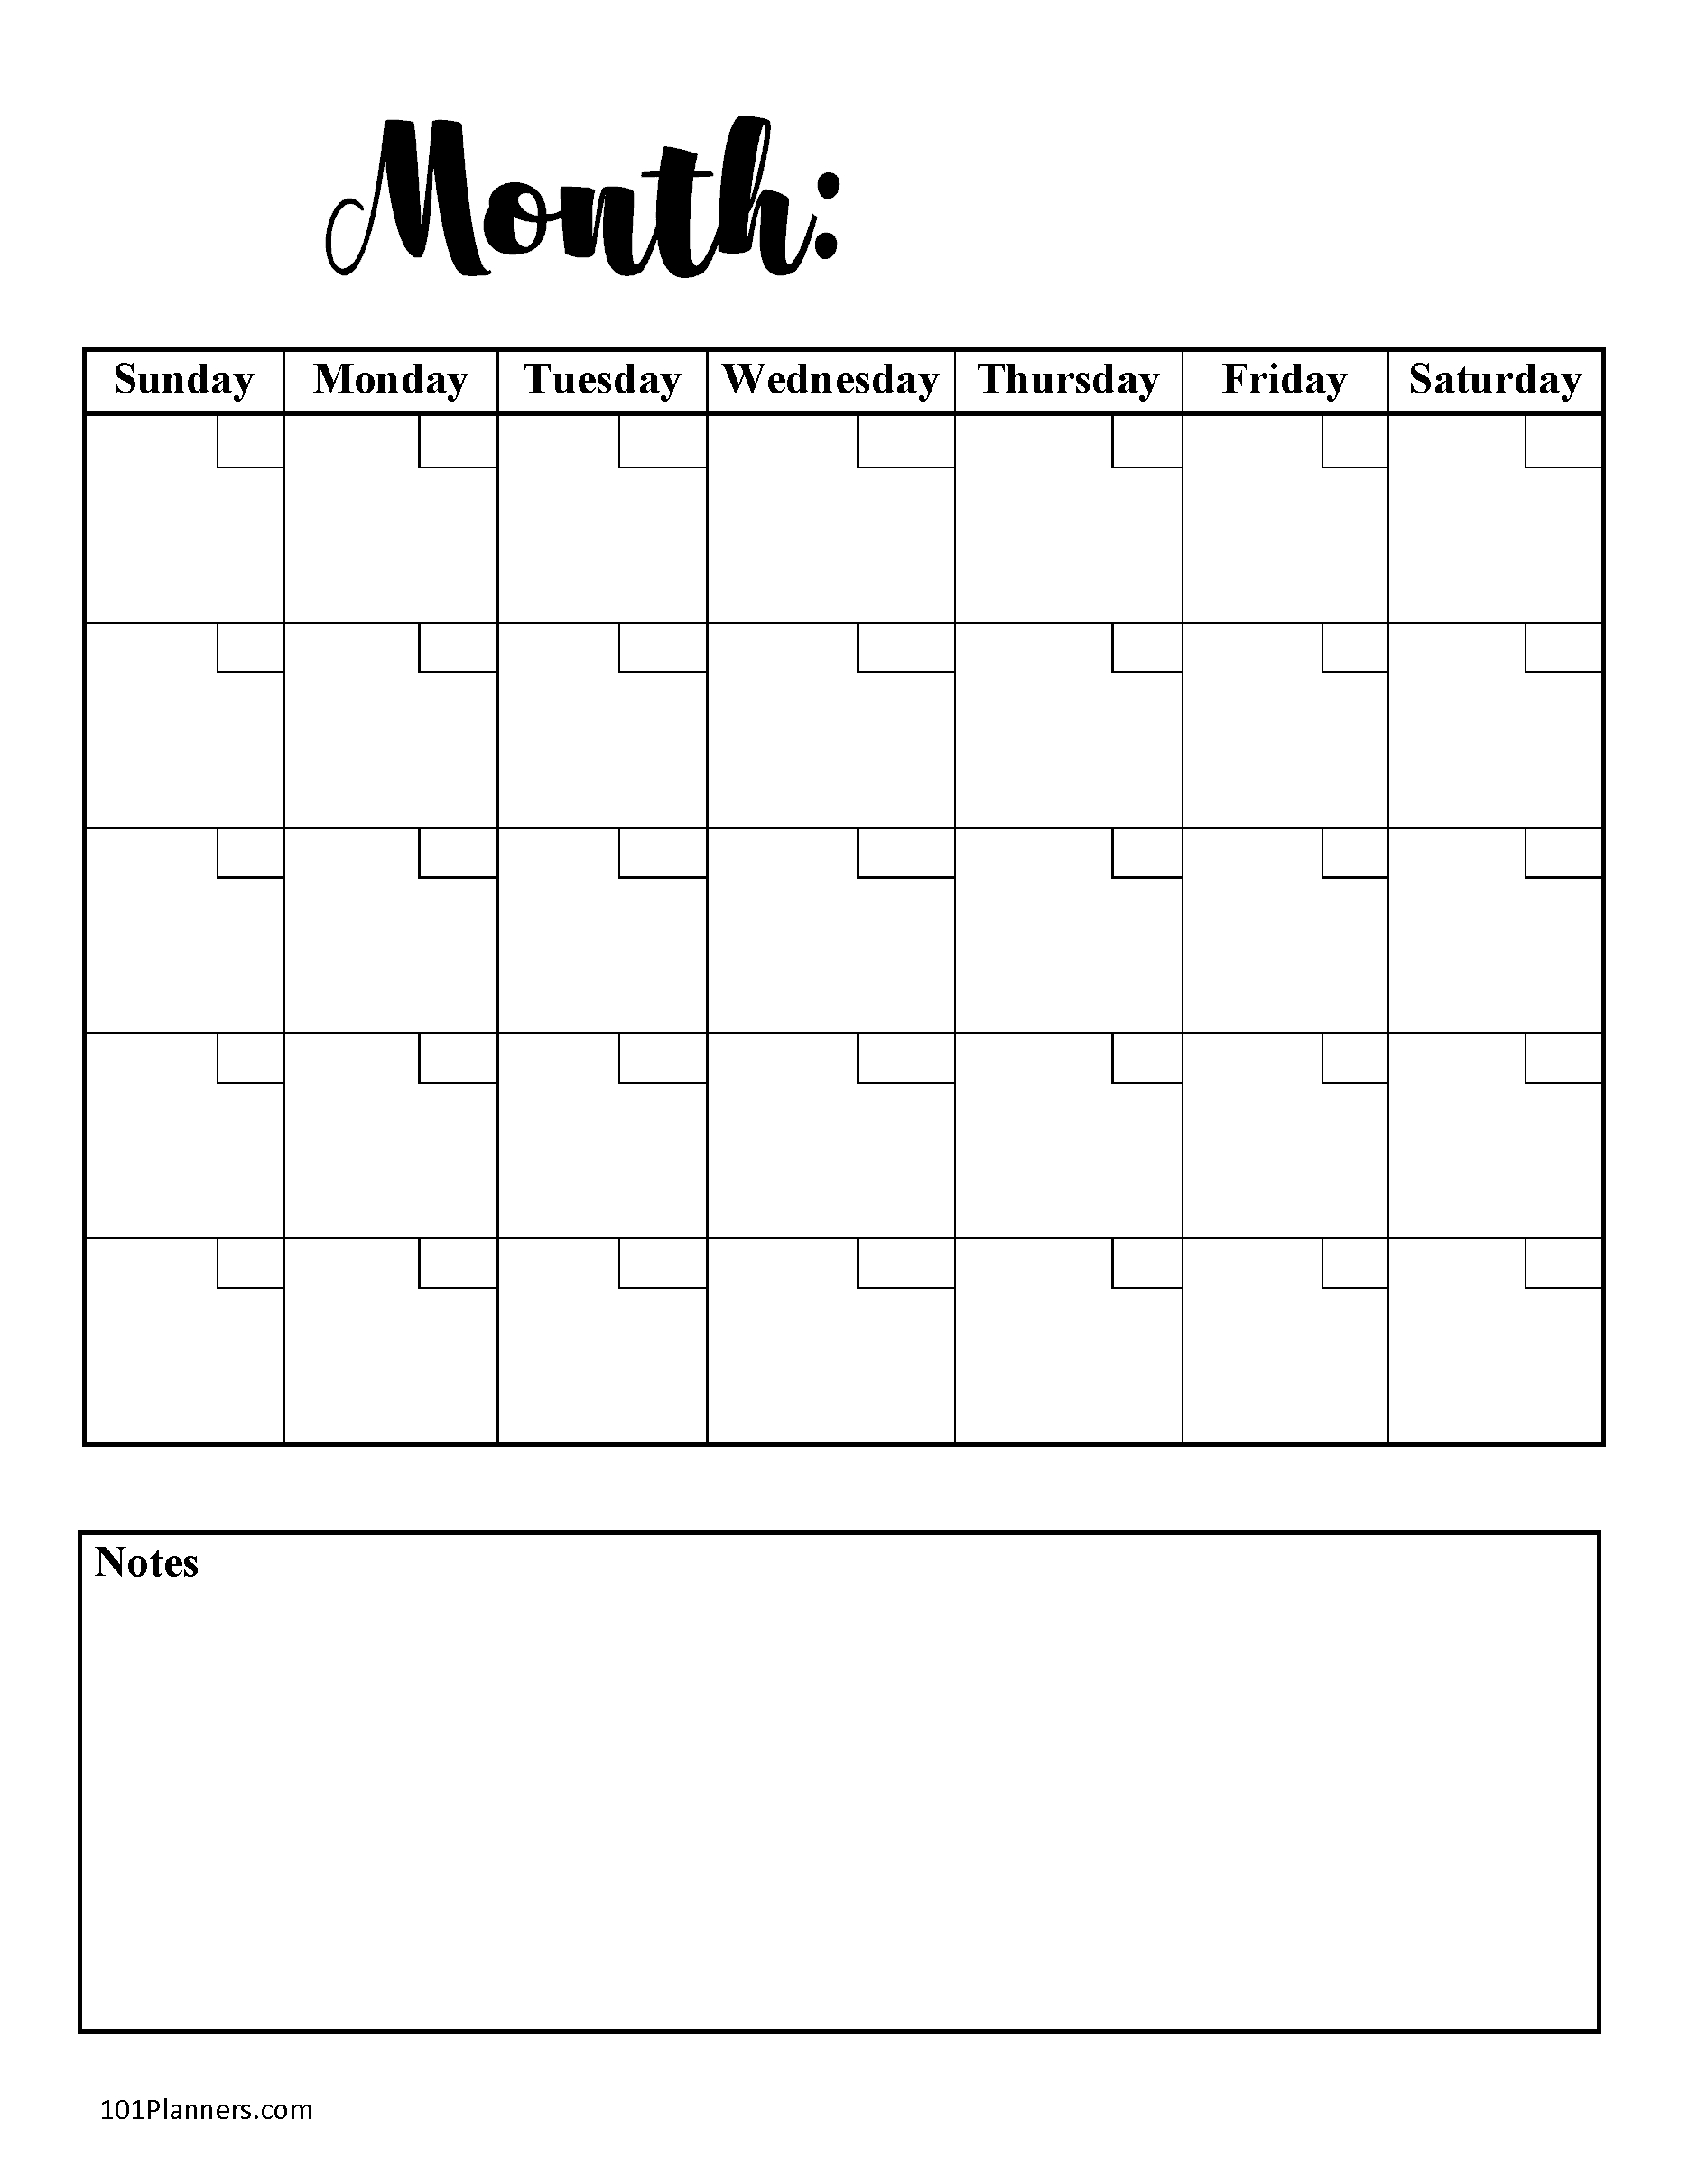 Free Blank Calendar Templates | Word, Excel, Pdf For Any Month 6 Months Calendar Word